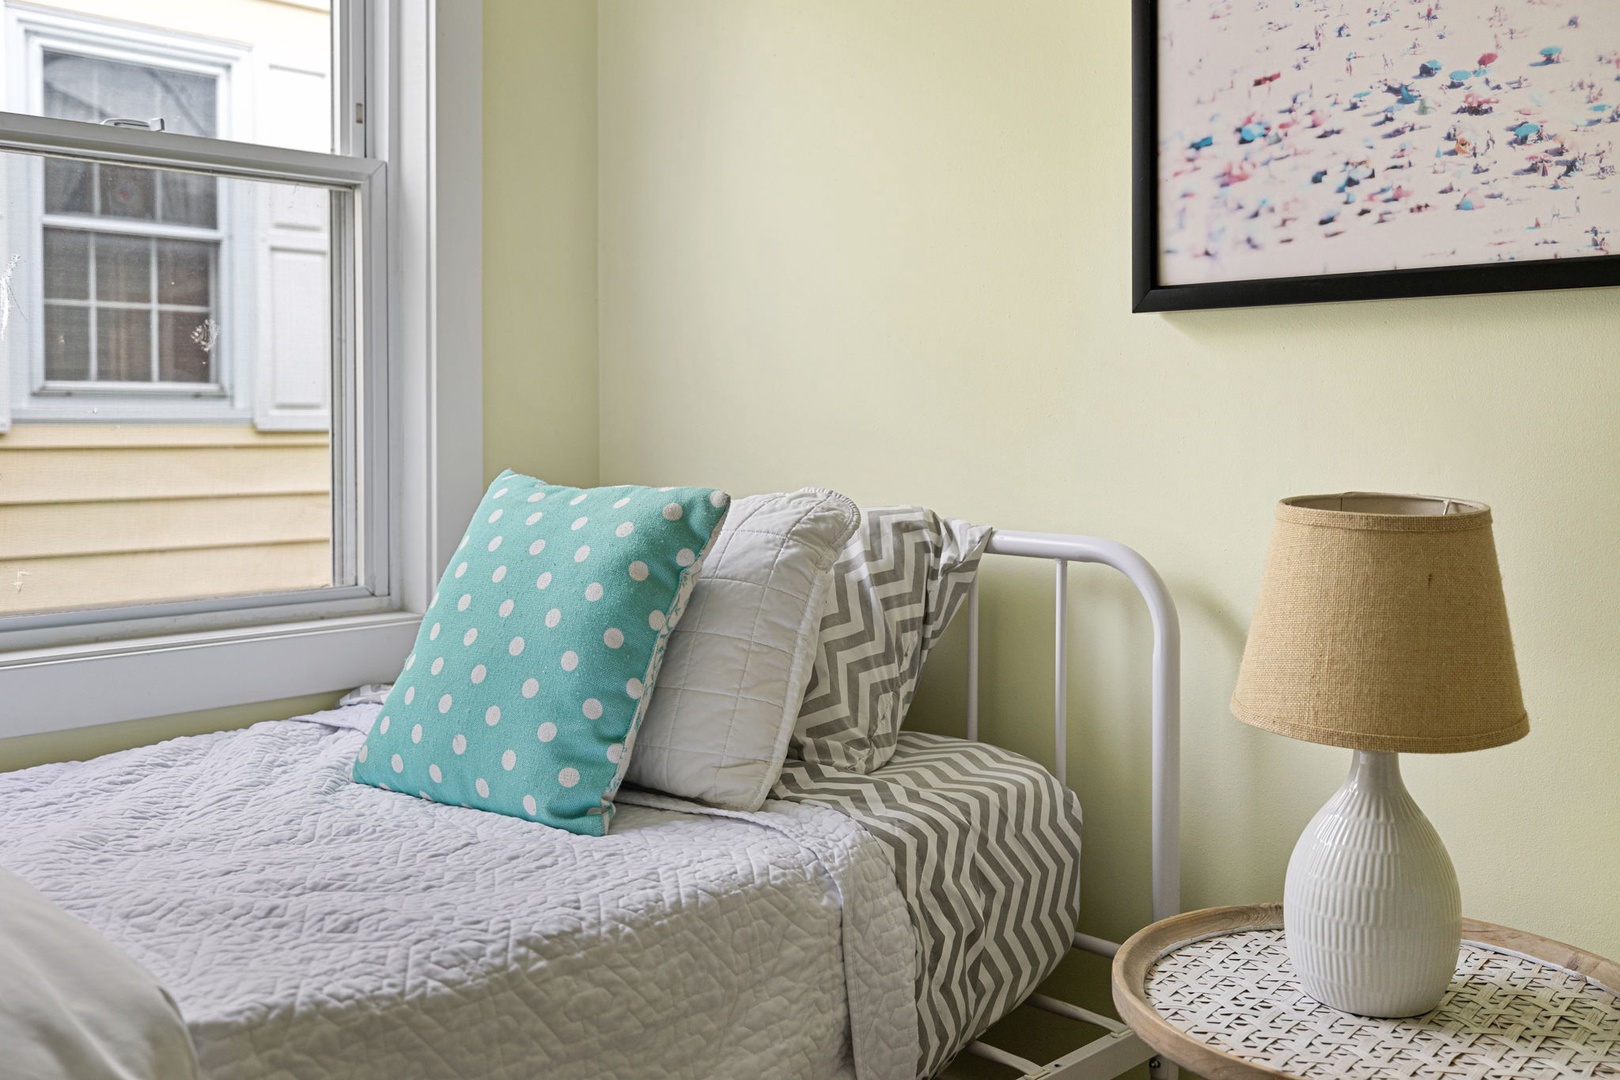 This cozy single bed is part of a super-cute bedroom.